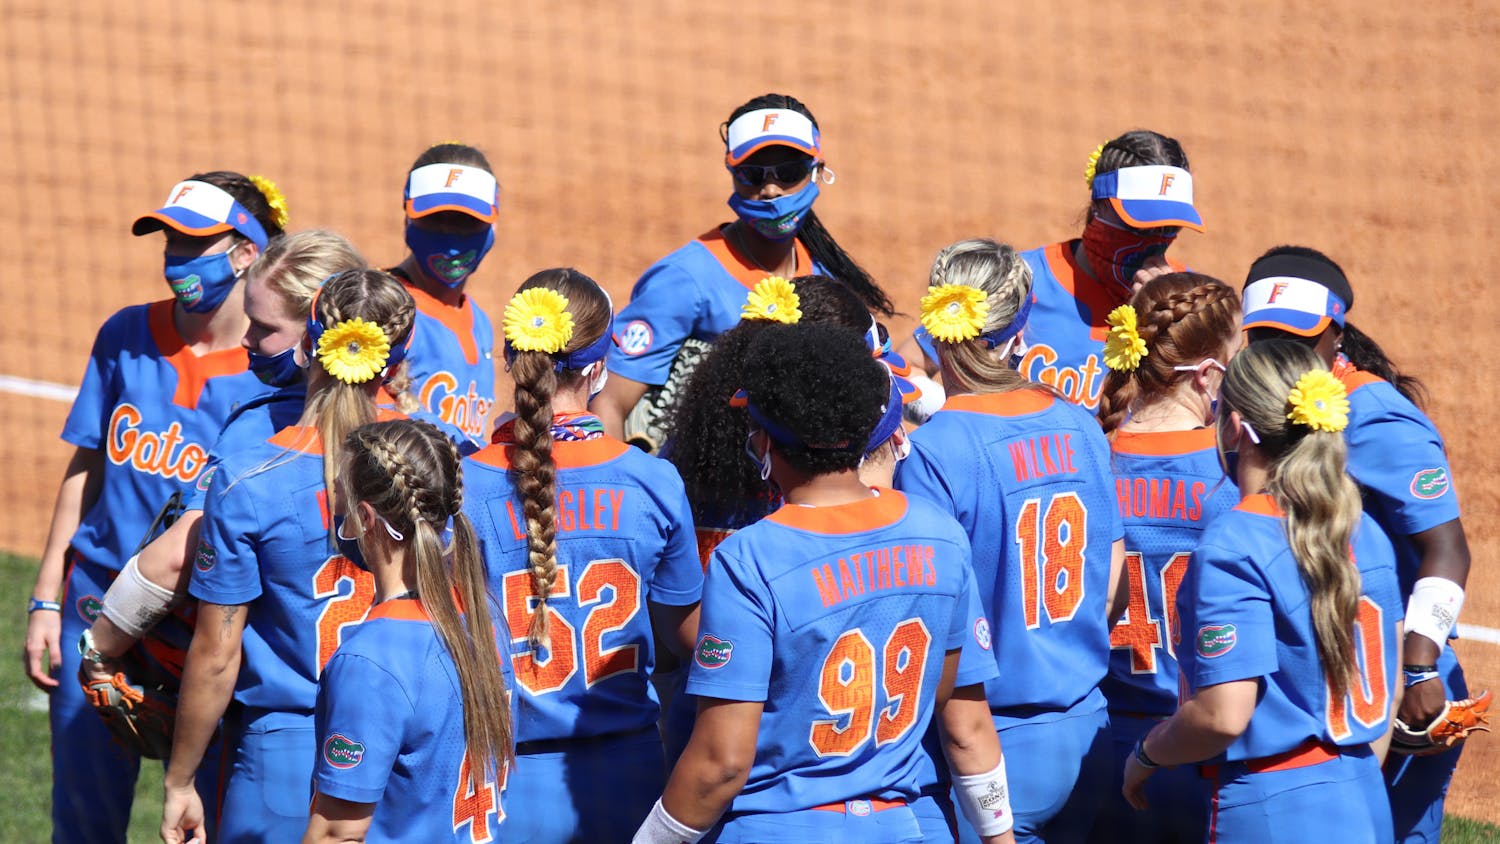 The Florida softball team during a game against Louisville Feb. 27, 2021. The Gators were edged by Mississippi State Sunday, 1-0 to drop game two of a three-game series.